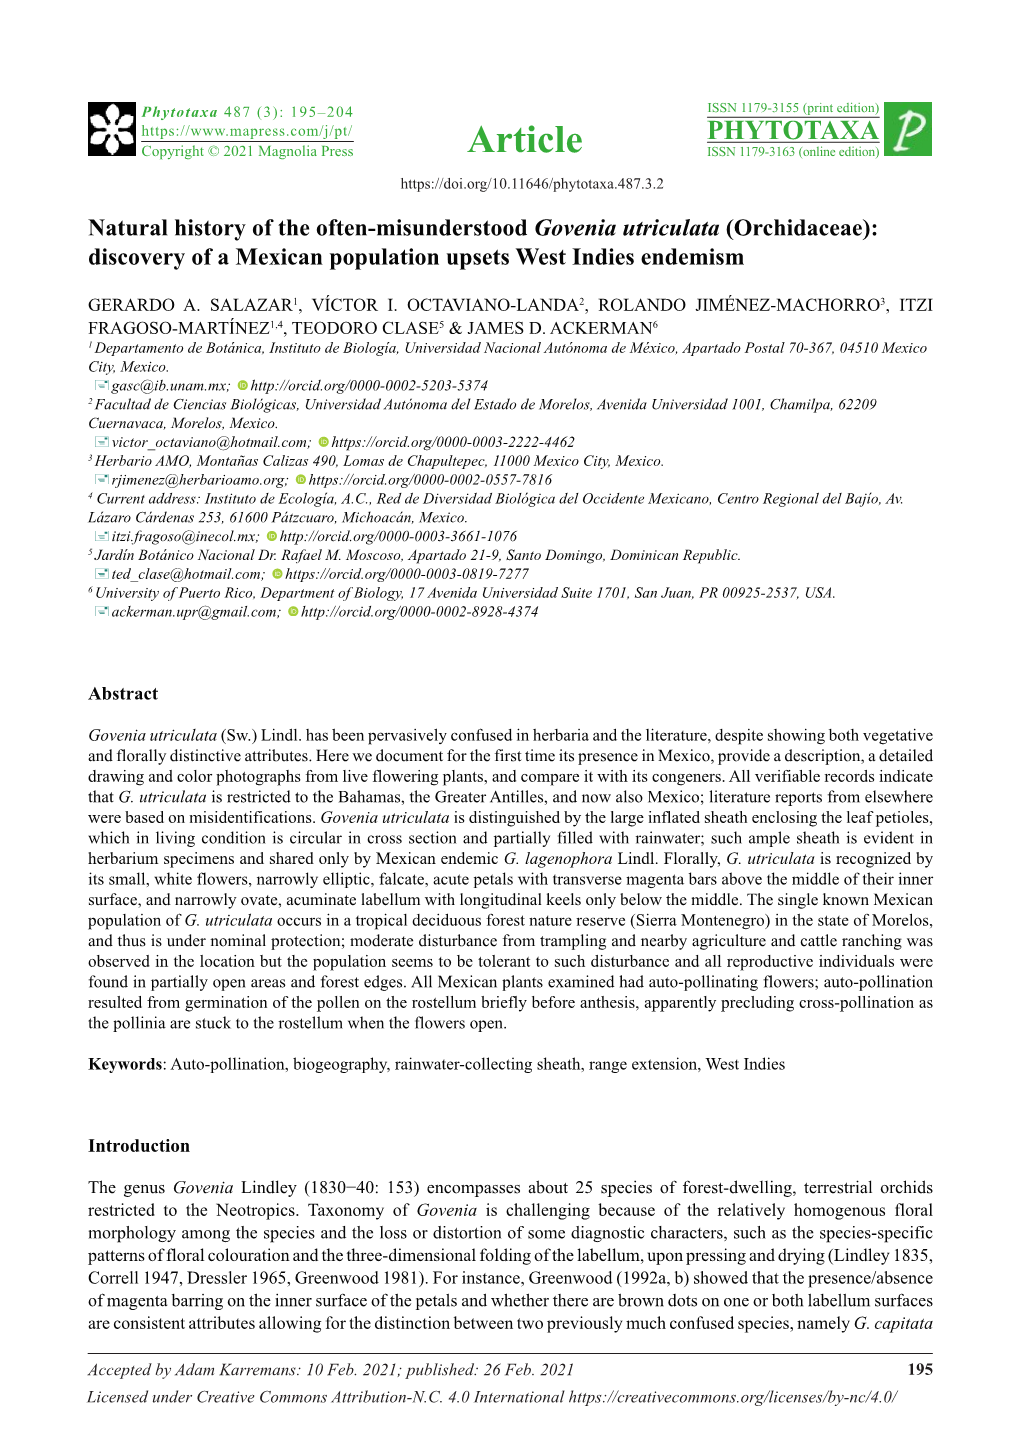 Natural History of the Often-Misunderstood Govenia Utriculata (Orchidaceae): Discovery of a Mexican Population Upsets West Indies Endemism